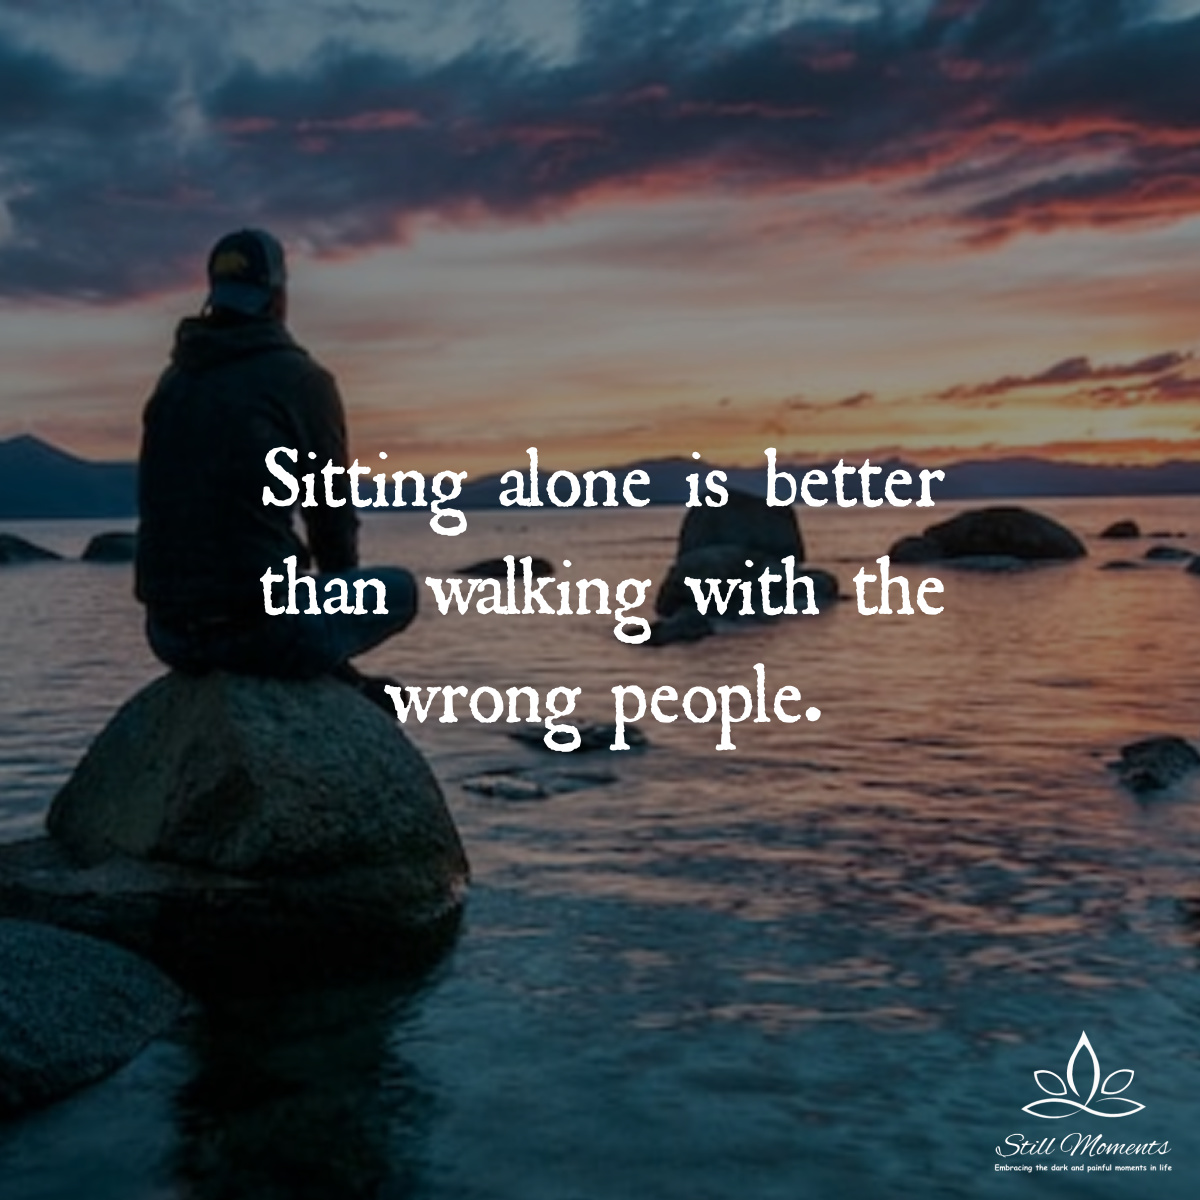 being alone is better than being with the wrong person